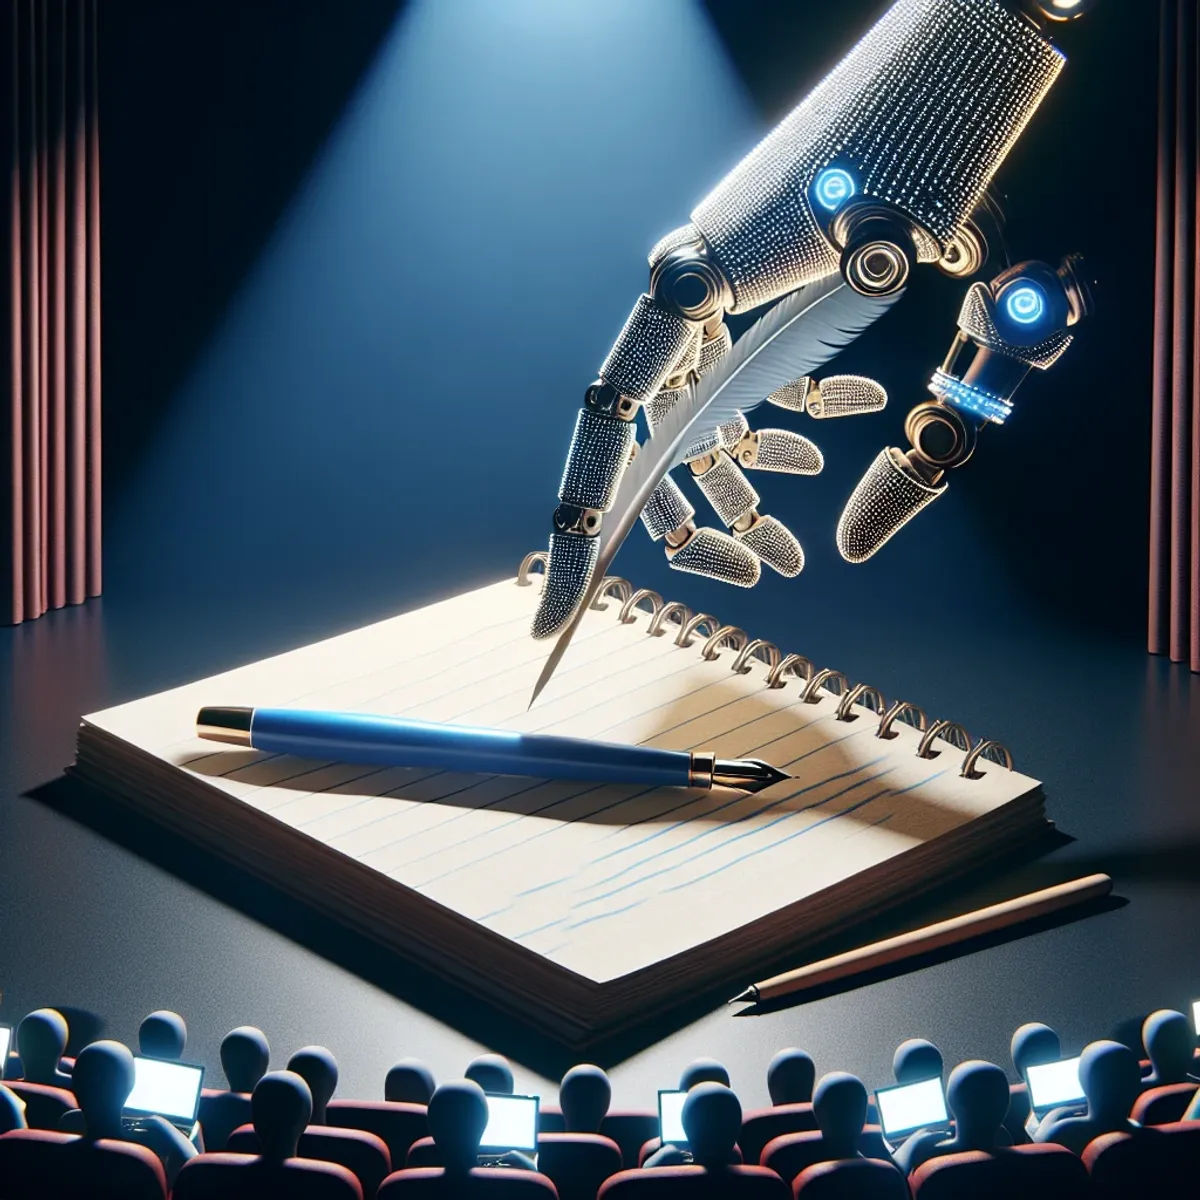 An illuminated theater stage with a classic quill pen and a spiral-bound script notebook open to blank pages in the spotlight. A large, sleek robotic hand poised to aid in the writing process hovers just off-stage. In the audience, multiple laptops and devices with glowing screens symbolize AI's capacity for collaboration and real-time feedback in scripting.